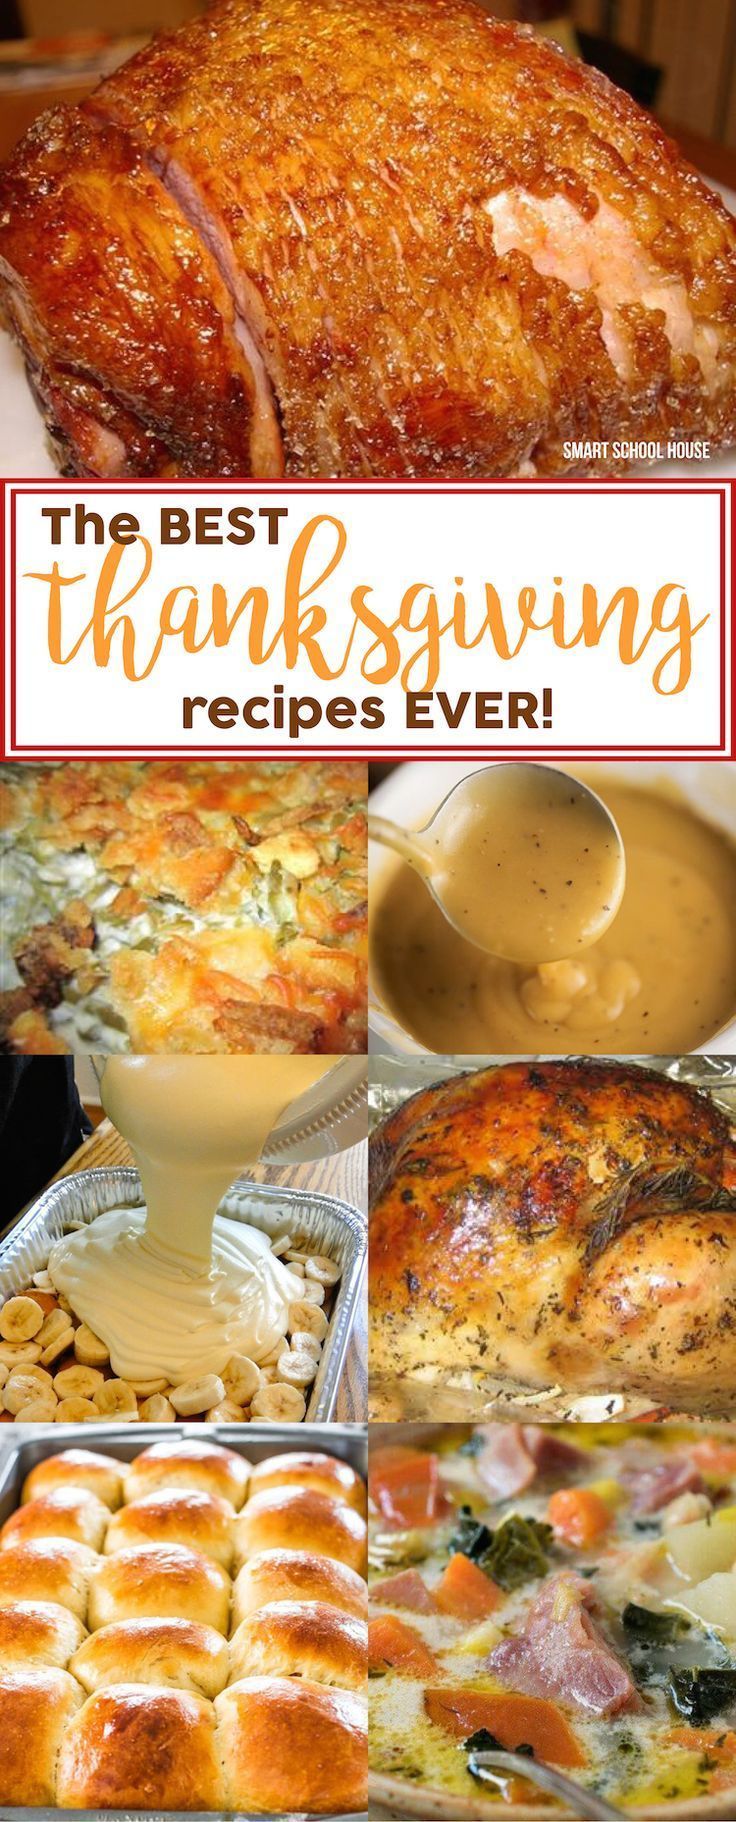 The BEST Thanksgiving recipes EVER! The best recipes for Thanksgiving turkey and s